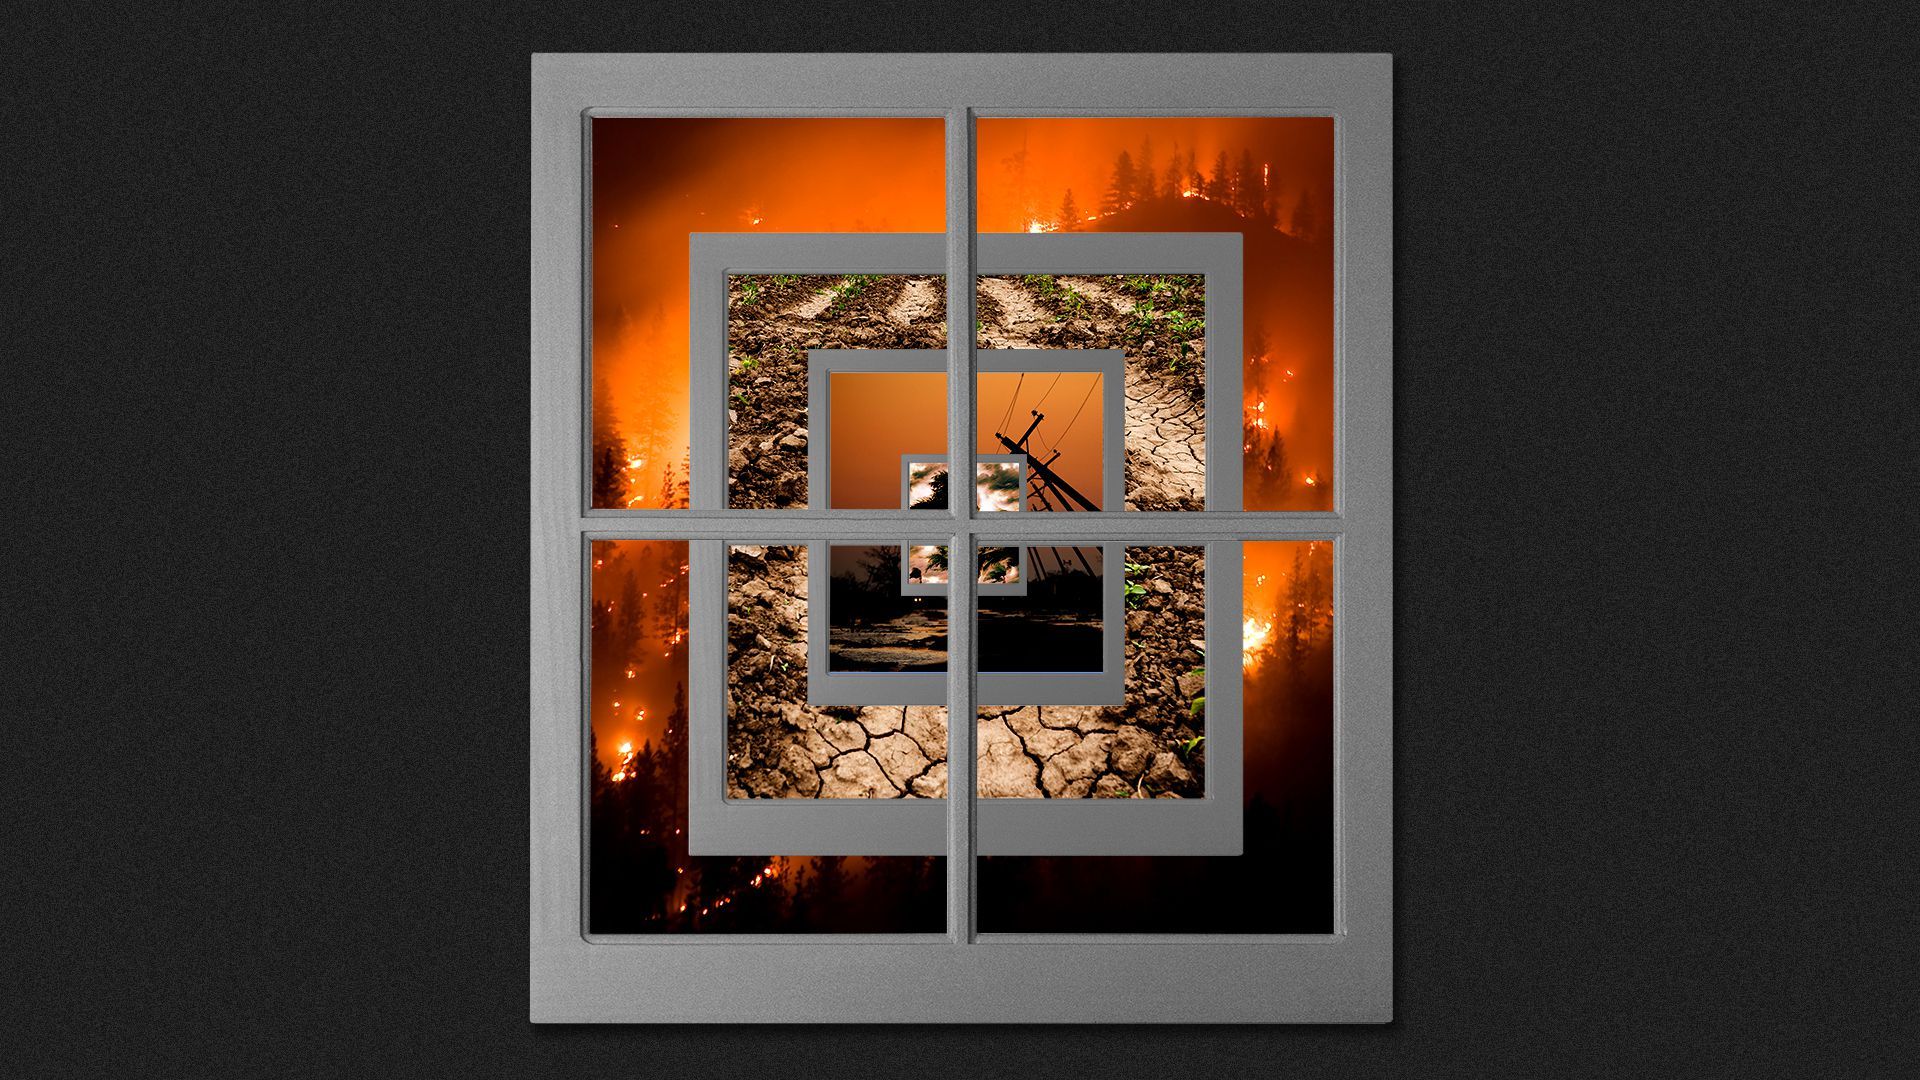 Illustration of many a window showing a wildfire through the glass, as well as another window with drought imagery, which holds another window with a photo of a hurricane